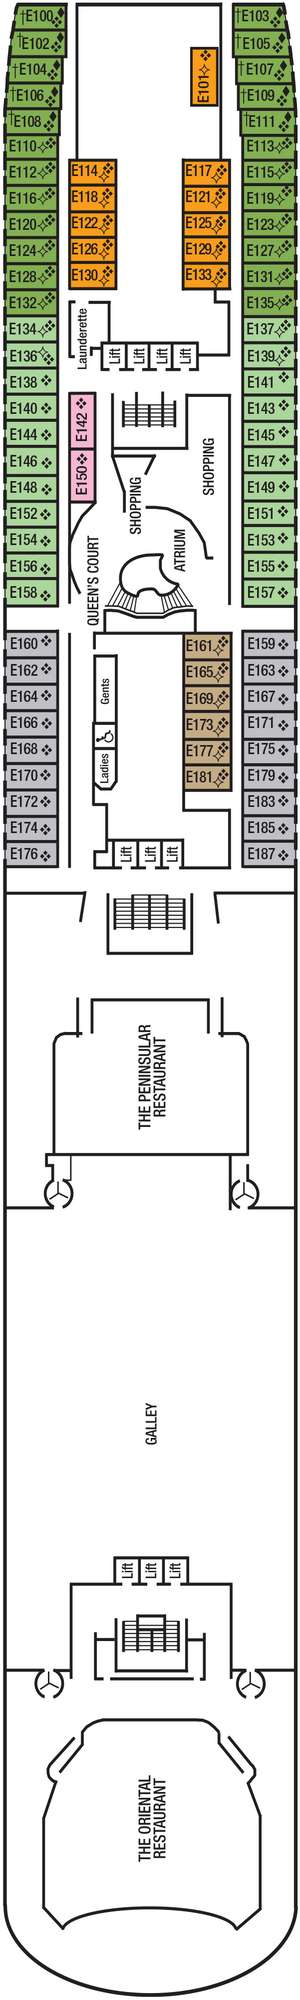 Deck plan for Oriana